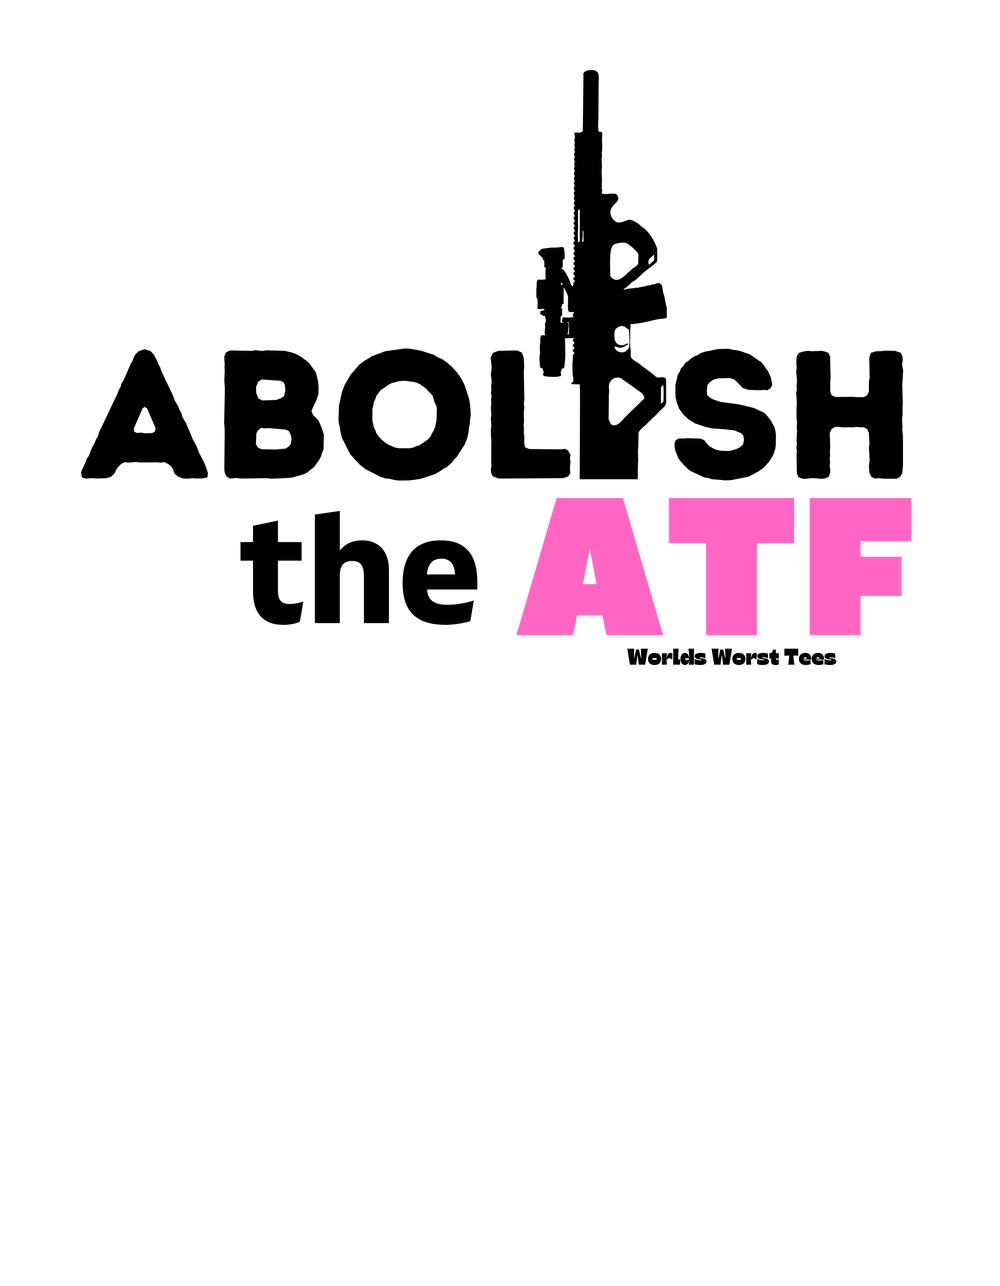 Men's premium fitted short sleeve tee, Abolish the ATF design. High-quality graphic print in pink letters on black background. 100% combed cotton, tear-away label, premium fit. Ideal for workouts and daily wear.